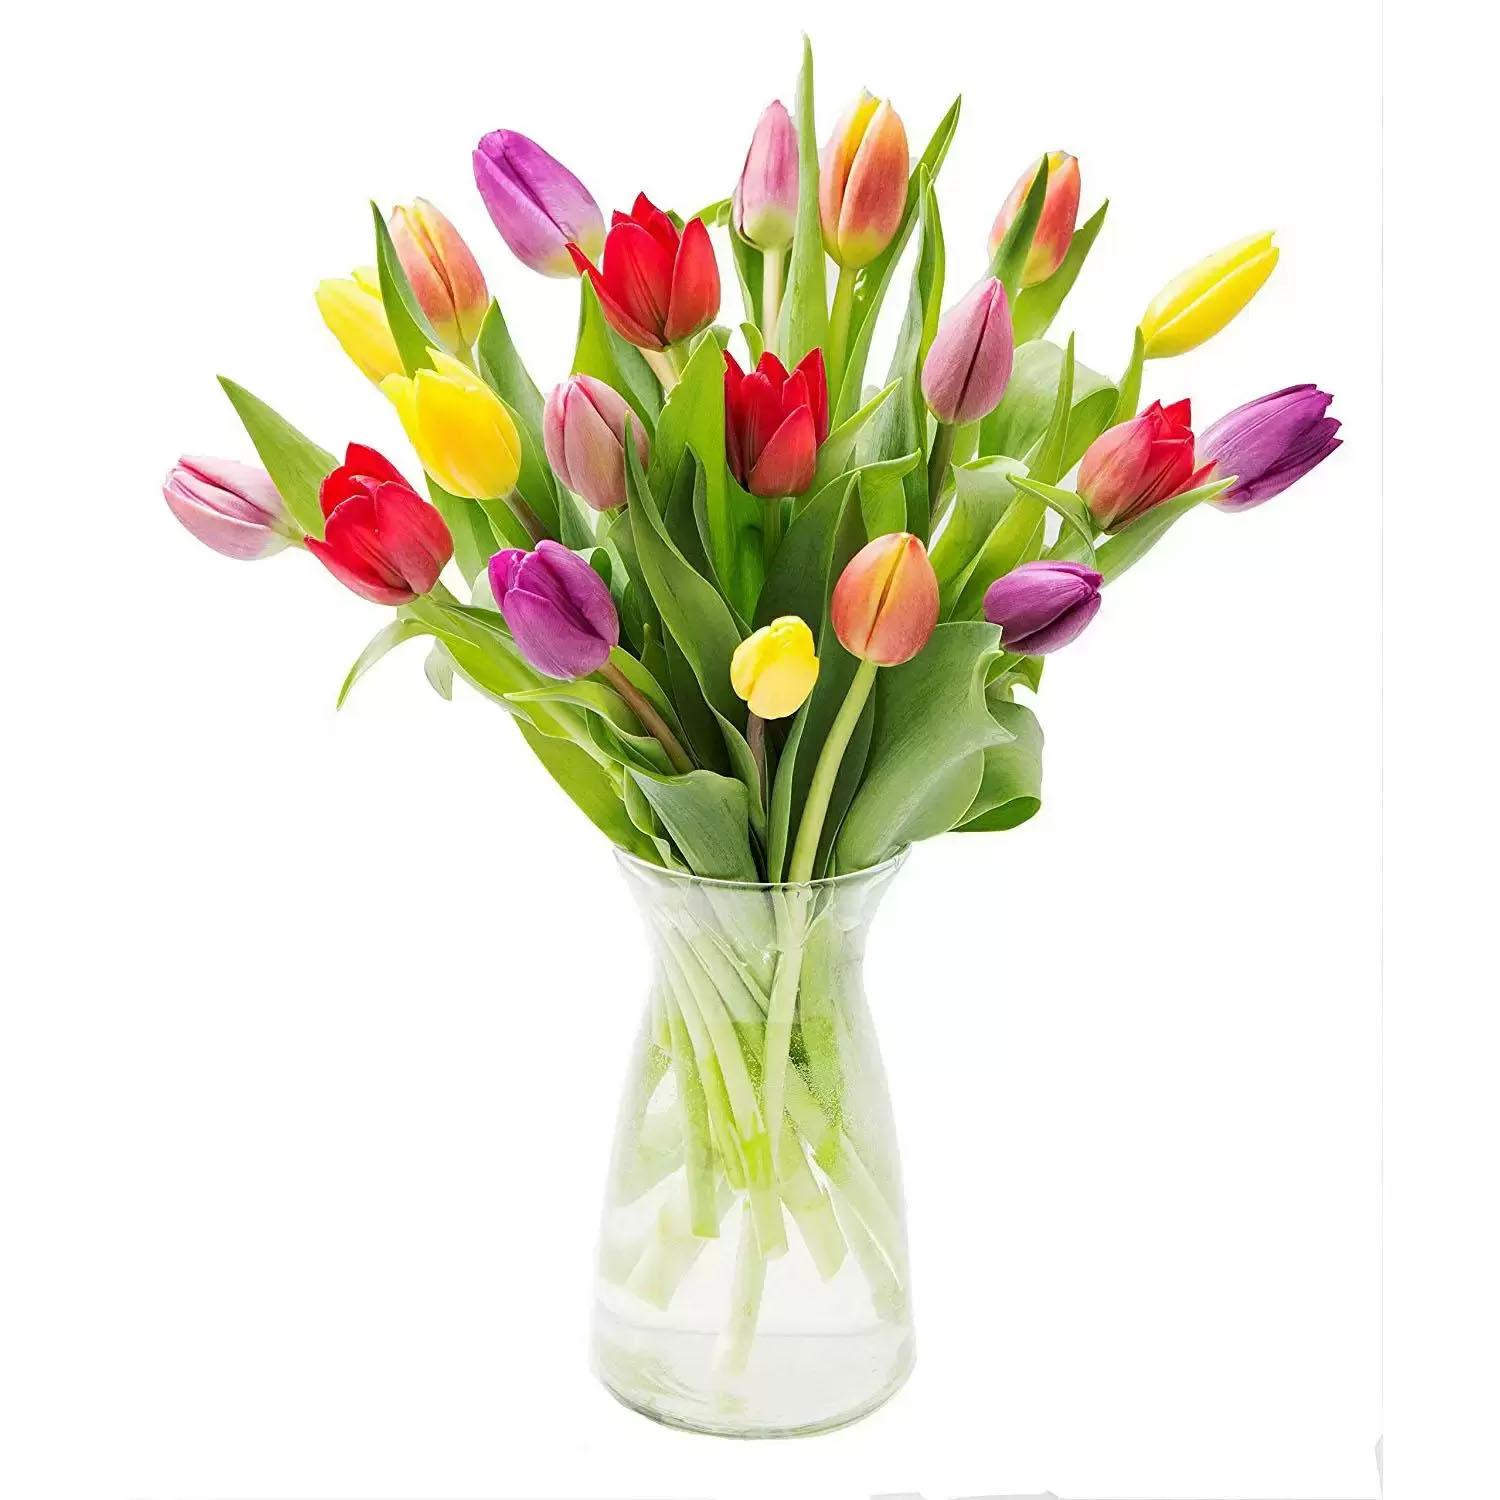 20-Stem Bunch of Tulips at Whole Foods for $10